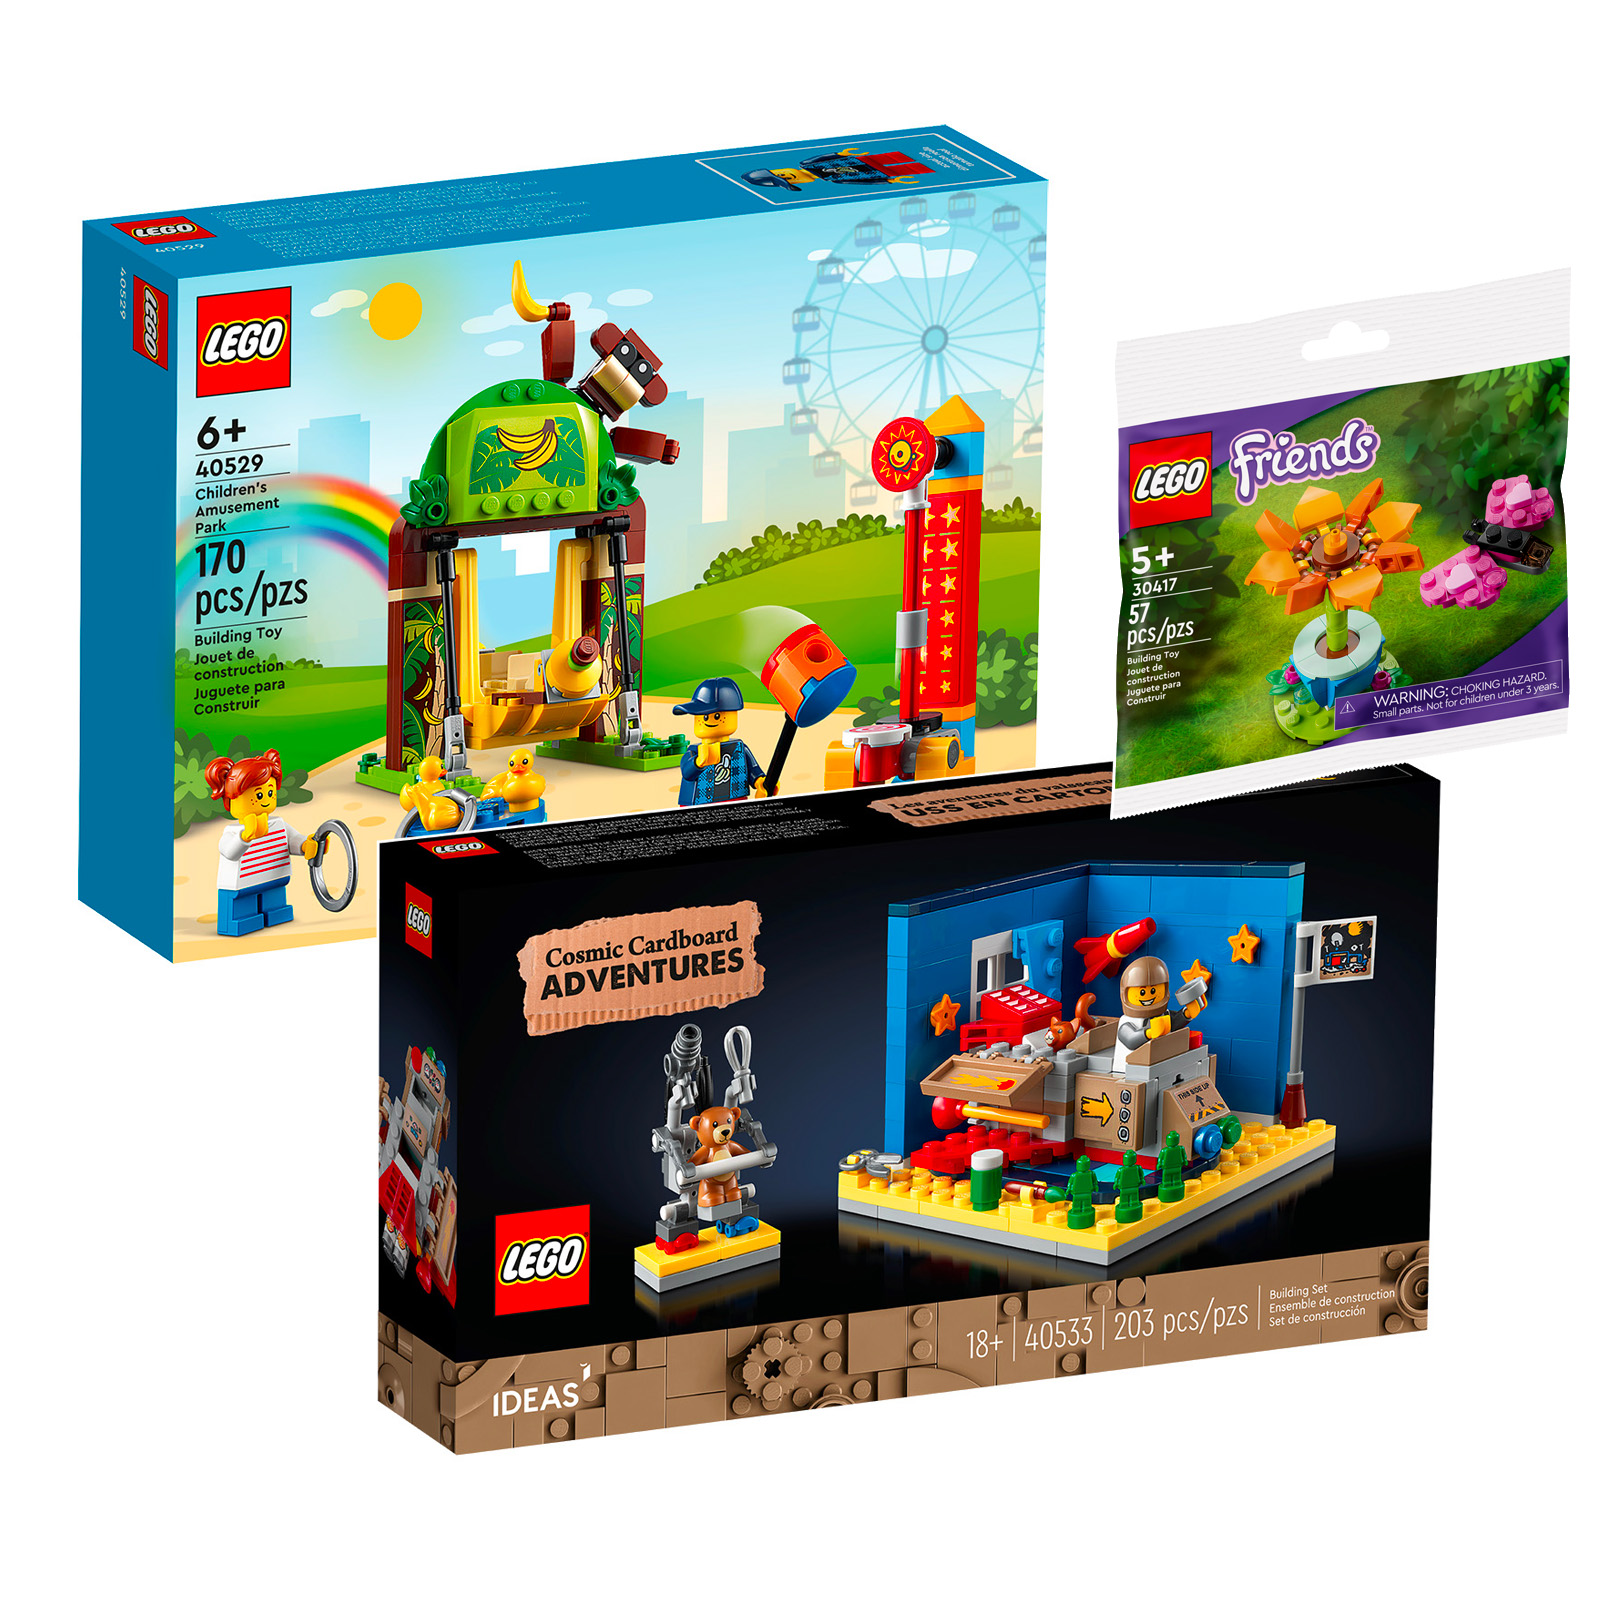 On the LEGO Shop: three cumulative promotional offers until May 30, 2022